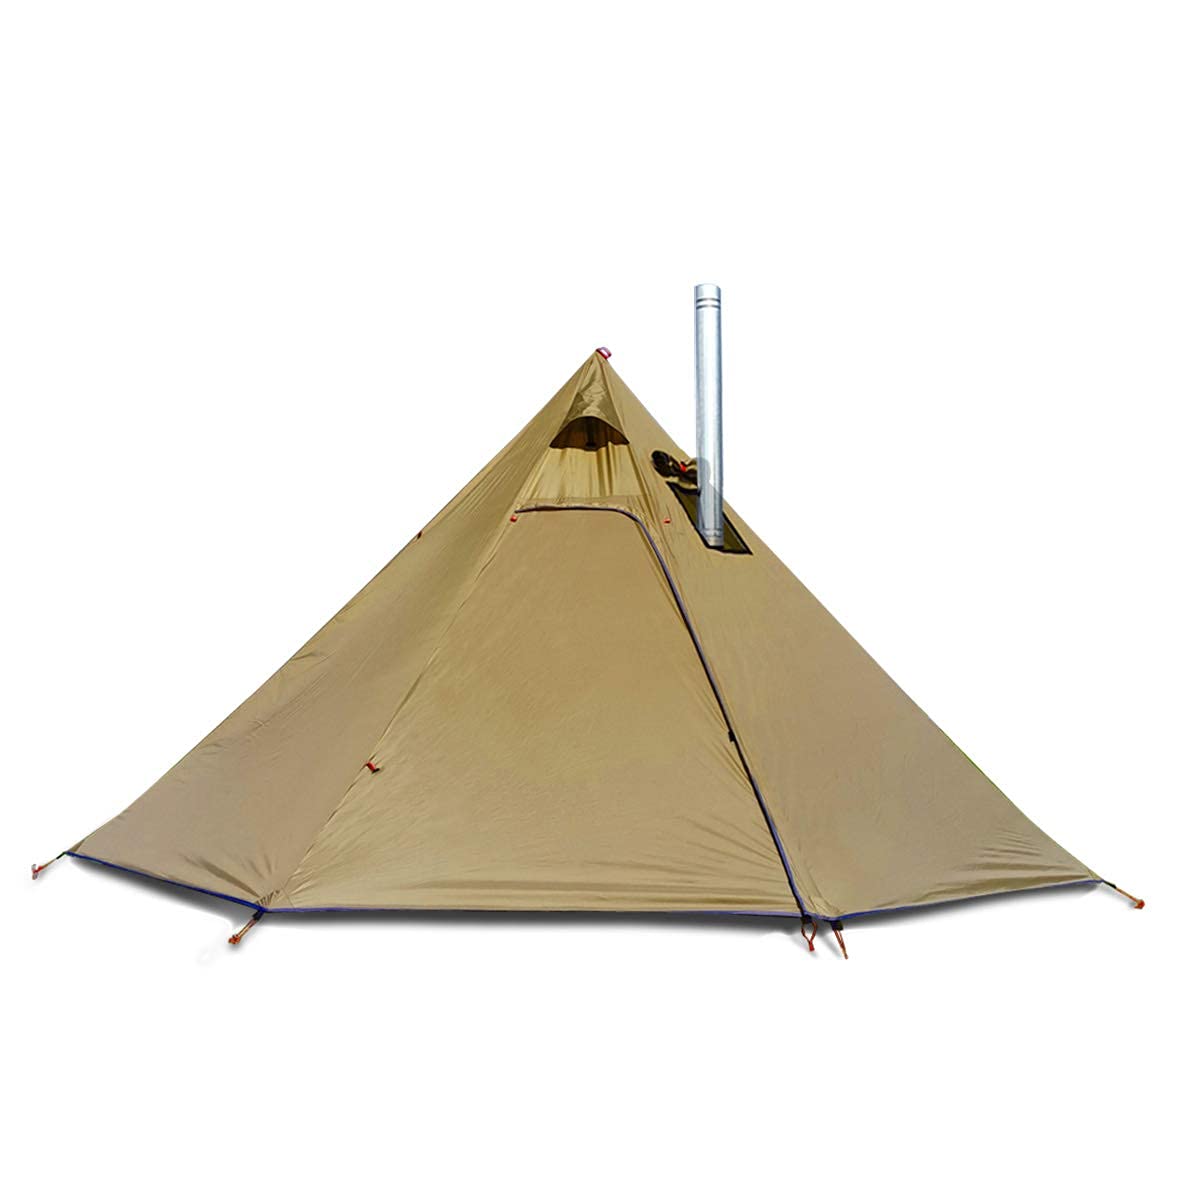 Preself 4 Persons 5lb Lightweight Tipi Hot Tents with Stove Jack